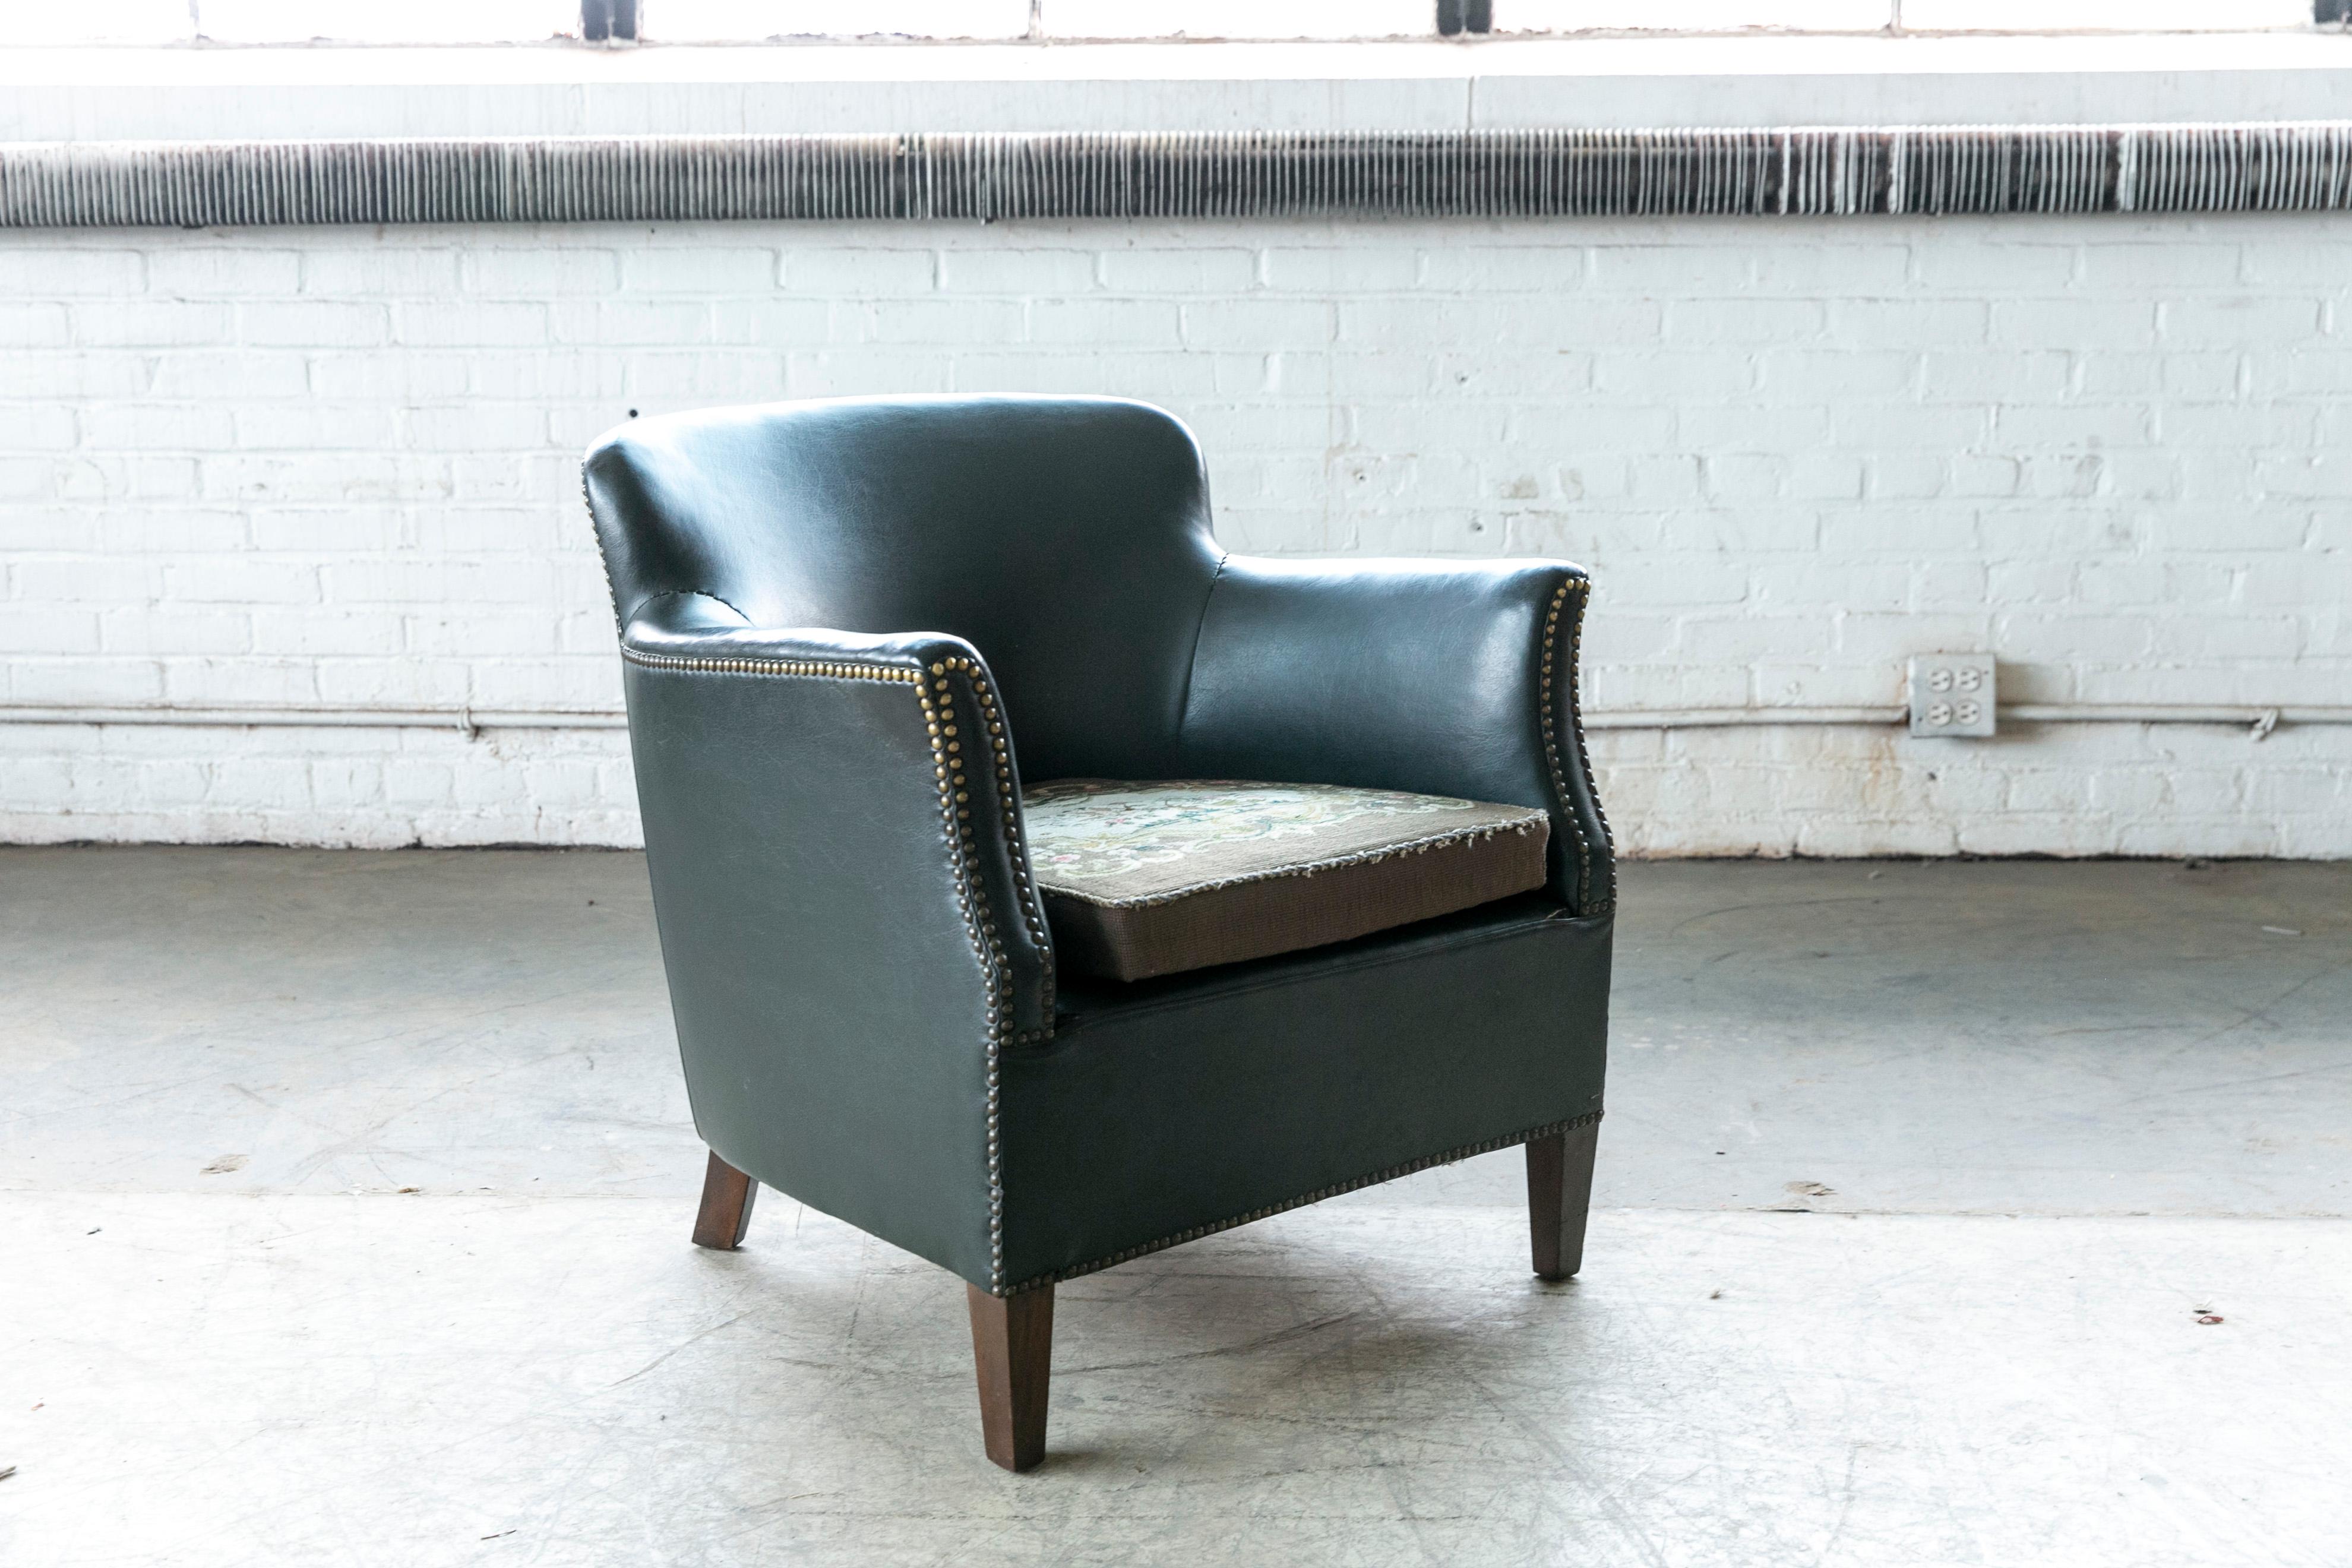 Charming small scale Danish club chair likely made by Danish Furniture Maker Oskar Hansen around the mid-1930s to early 1940's. Covered in dark green leather with a smooth back and brass tacks for decoration. It has been reupholstered at a later